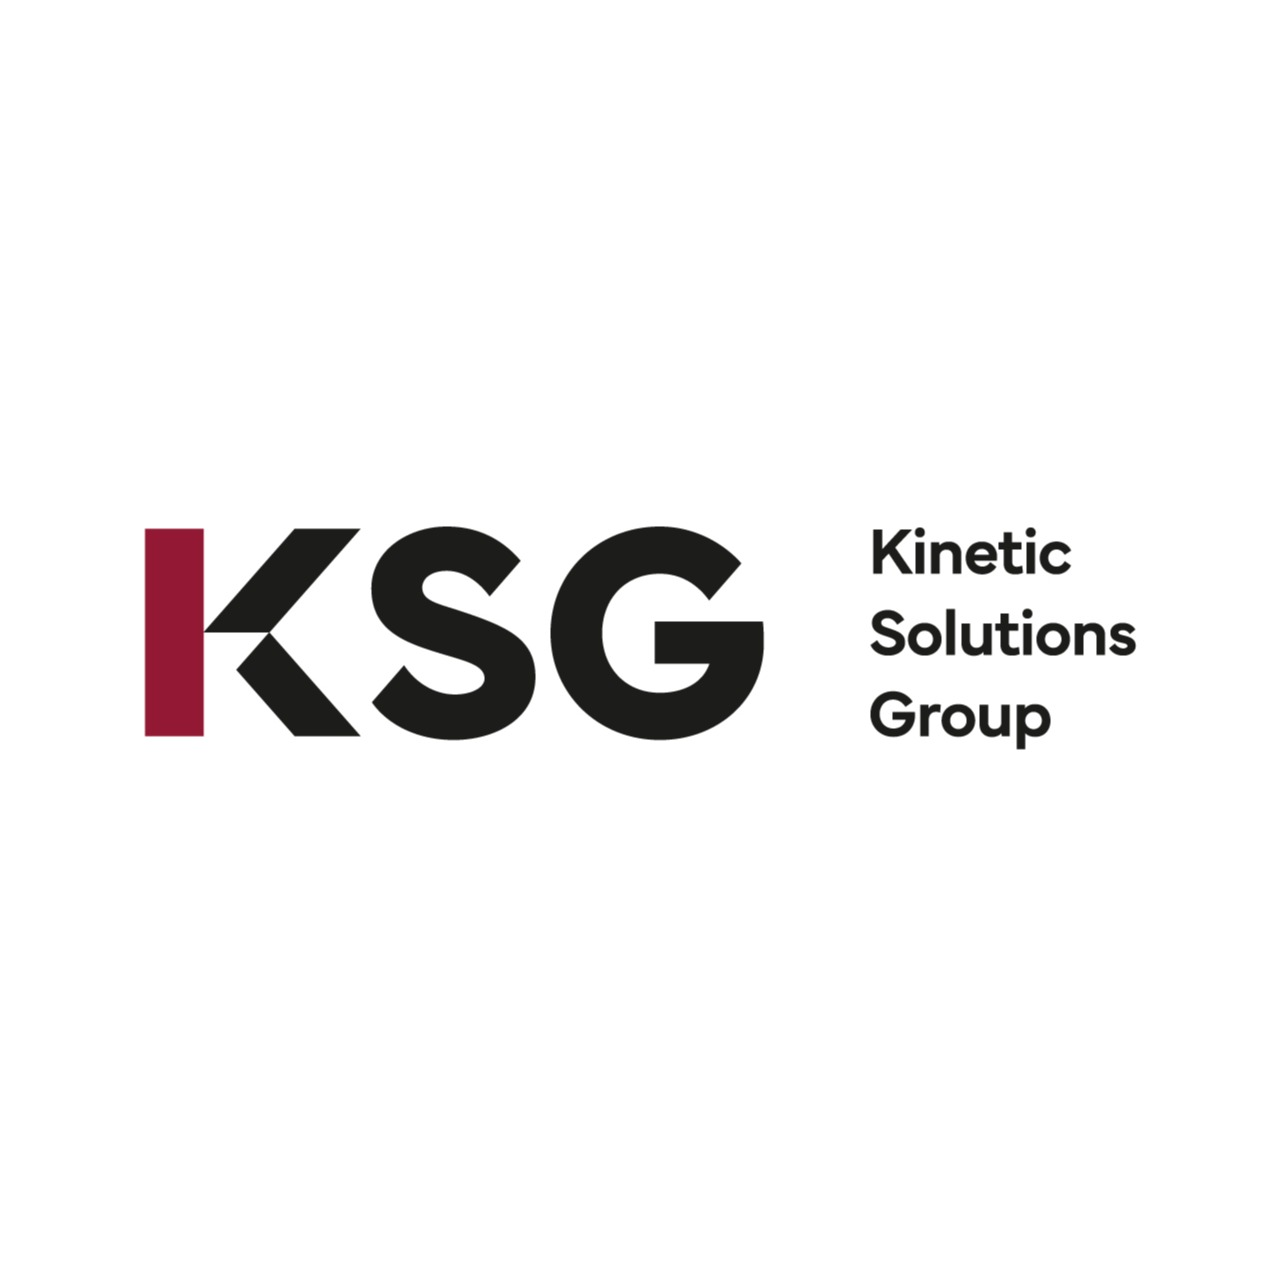 Kinetic Solutions Group Engineering Employer Skills Academy